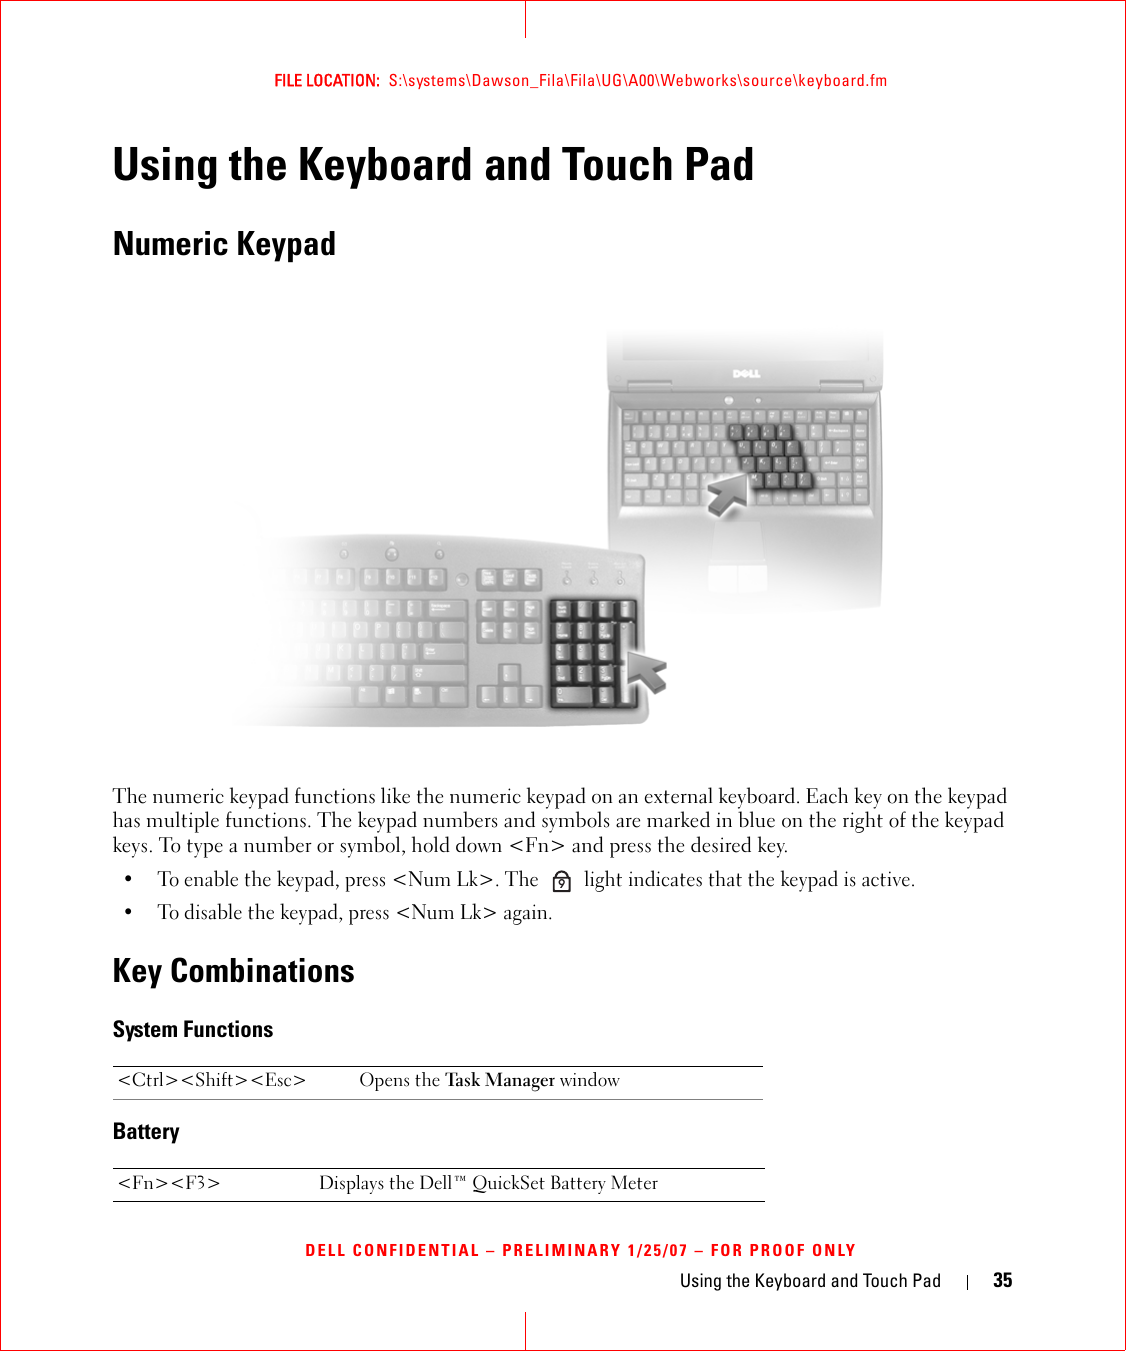 Using the Keyboard and Touch Pad 35FILE LOCATION:  S:\systems\Dawson_Fila\Fila\UG\A00\Webworks\source\keyboard.fmDELL CONFIDENTIAL – PRELIMINARY 1/25/07 – FOR PROOF ONLYUsing the Keyboard and Touch PadNumeric KeypadThe numeric keypad functions like the numeric keypad on an external keyboard. Each key on the keypad has multiple functions. The keypad numbers and symbols are marked in blue on the right of the keypad keys. To type a number or symbol, hold down &lt;Fn&gt; and press the desired key.• To enable the keypad, press &lt;Num Lk&gt;. The   light indicates that the keypad is active.• To disable the keypad, press &lt;Num Lk&gt; again. Key CombinationsSystem FunctionsBattery&lt;Ctrl&gt;&lt;Shift&gt;&lt;Esc&gt; Opens the Task  Mana ger window&lt;Fn&gt;&lt;F3&gt; Displays the Dell™ QuickSet Battery Meter9